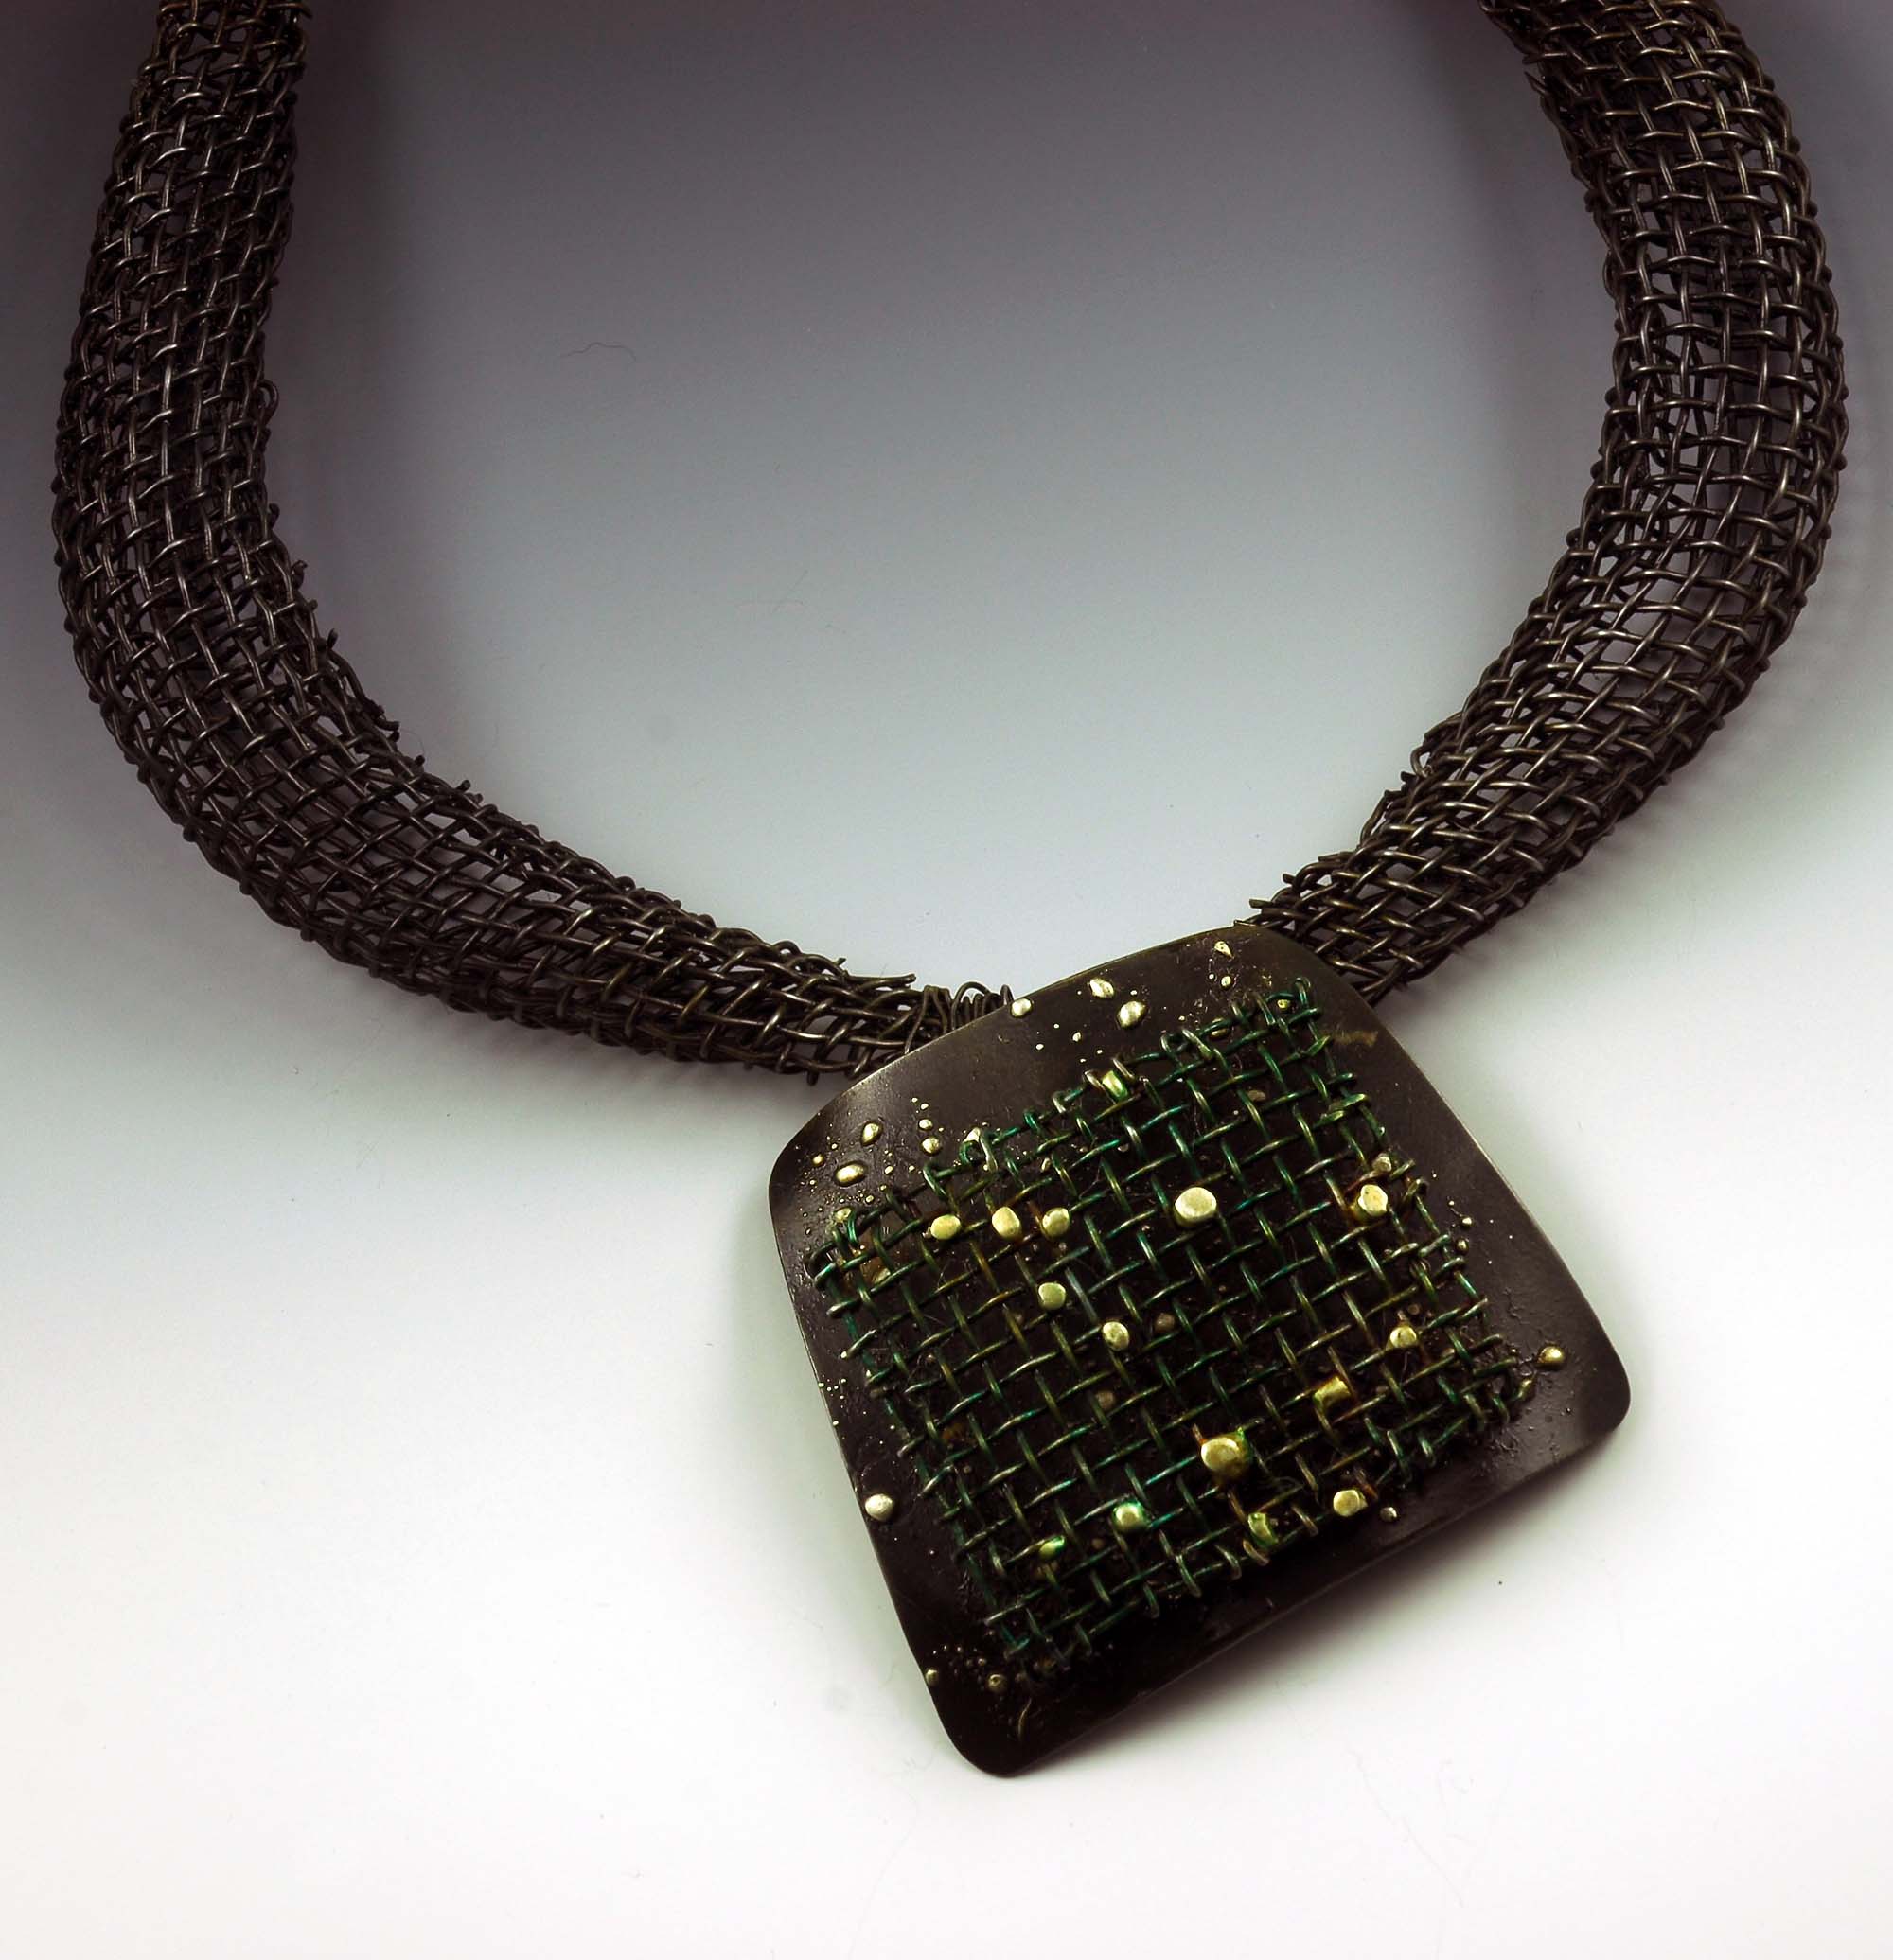 Wanna Mesh Around? Working with Woven Steel Fusing and Enameling Steel Mesh